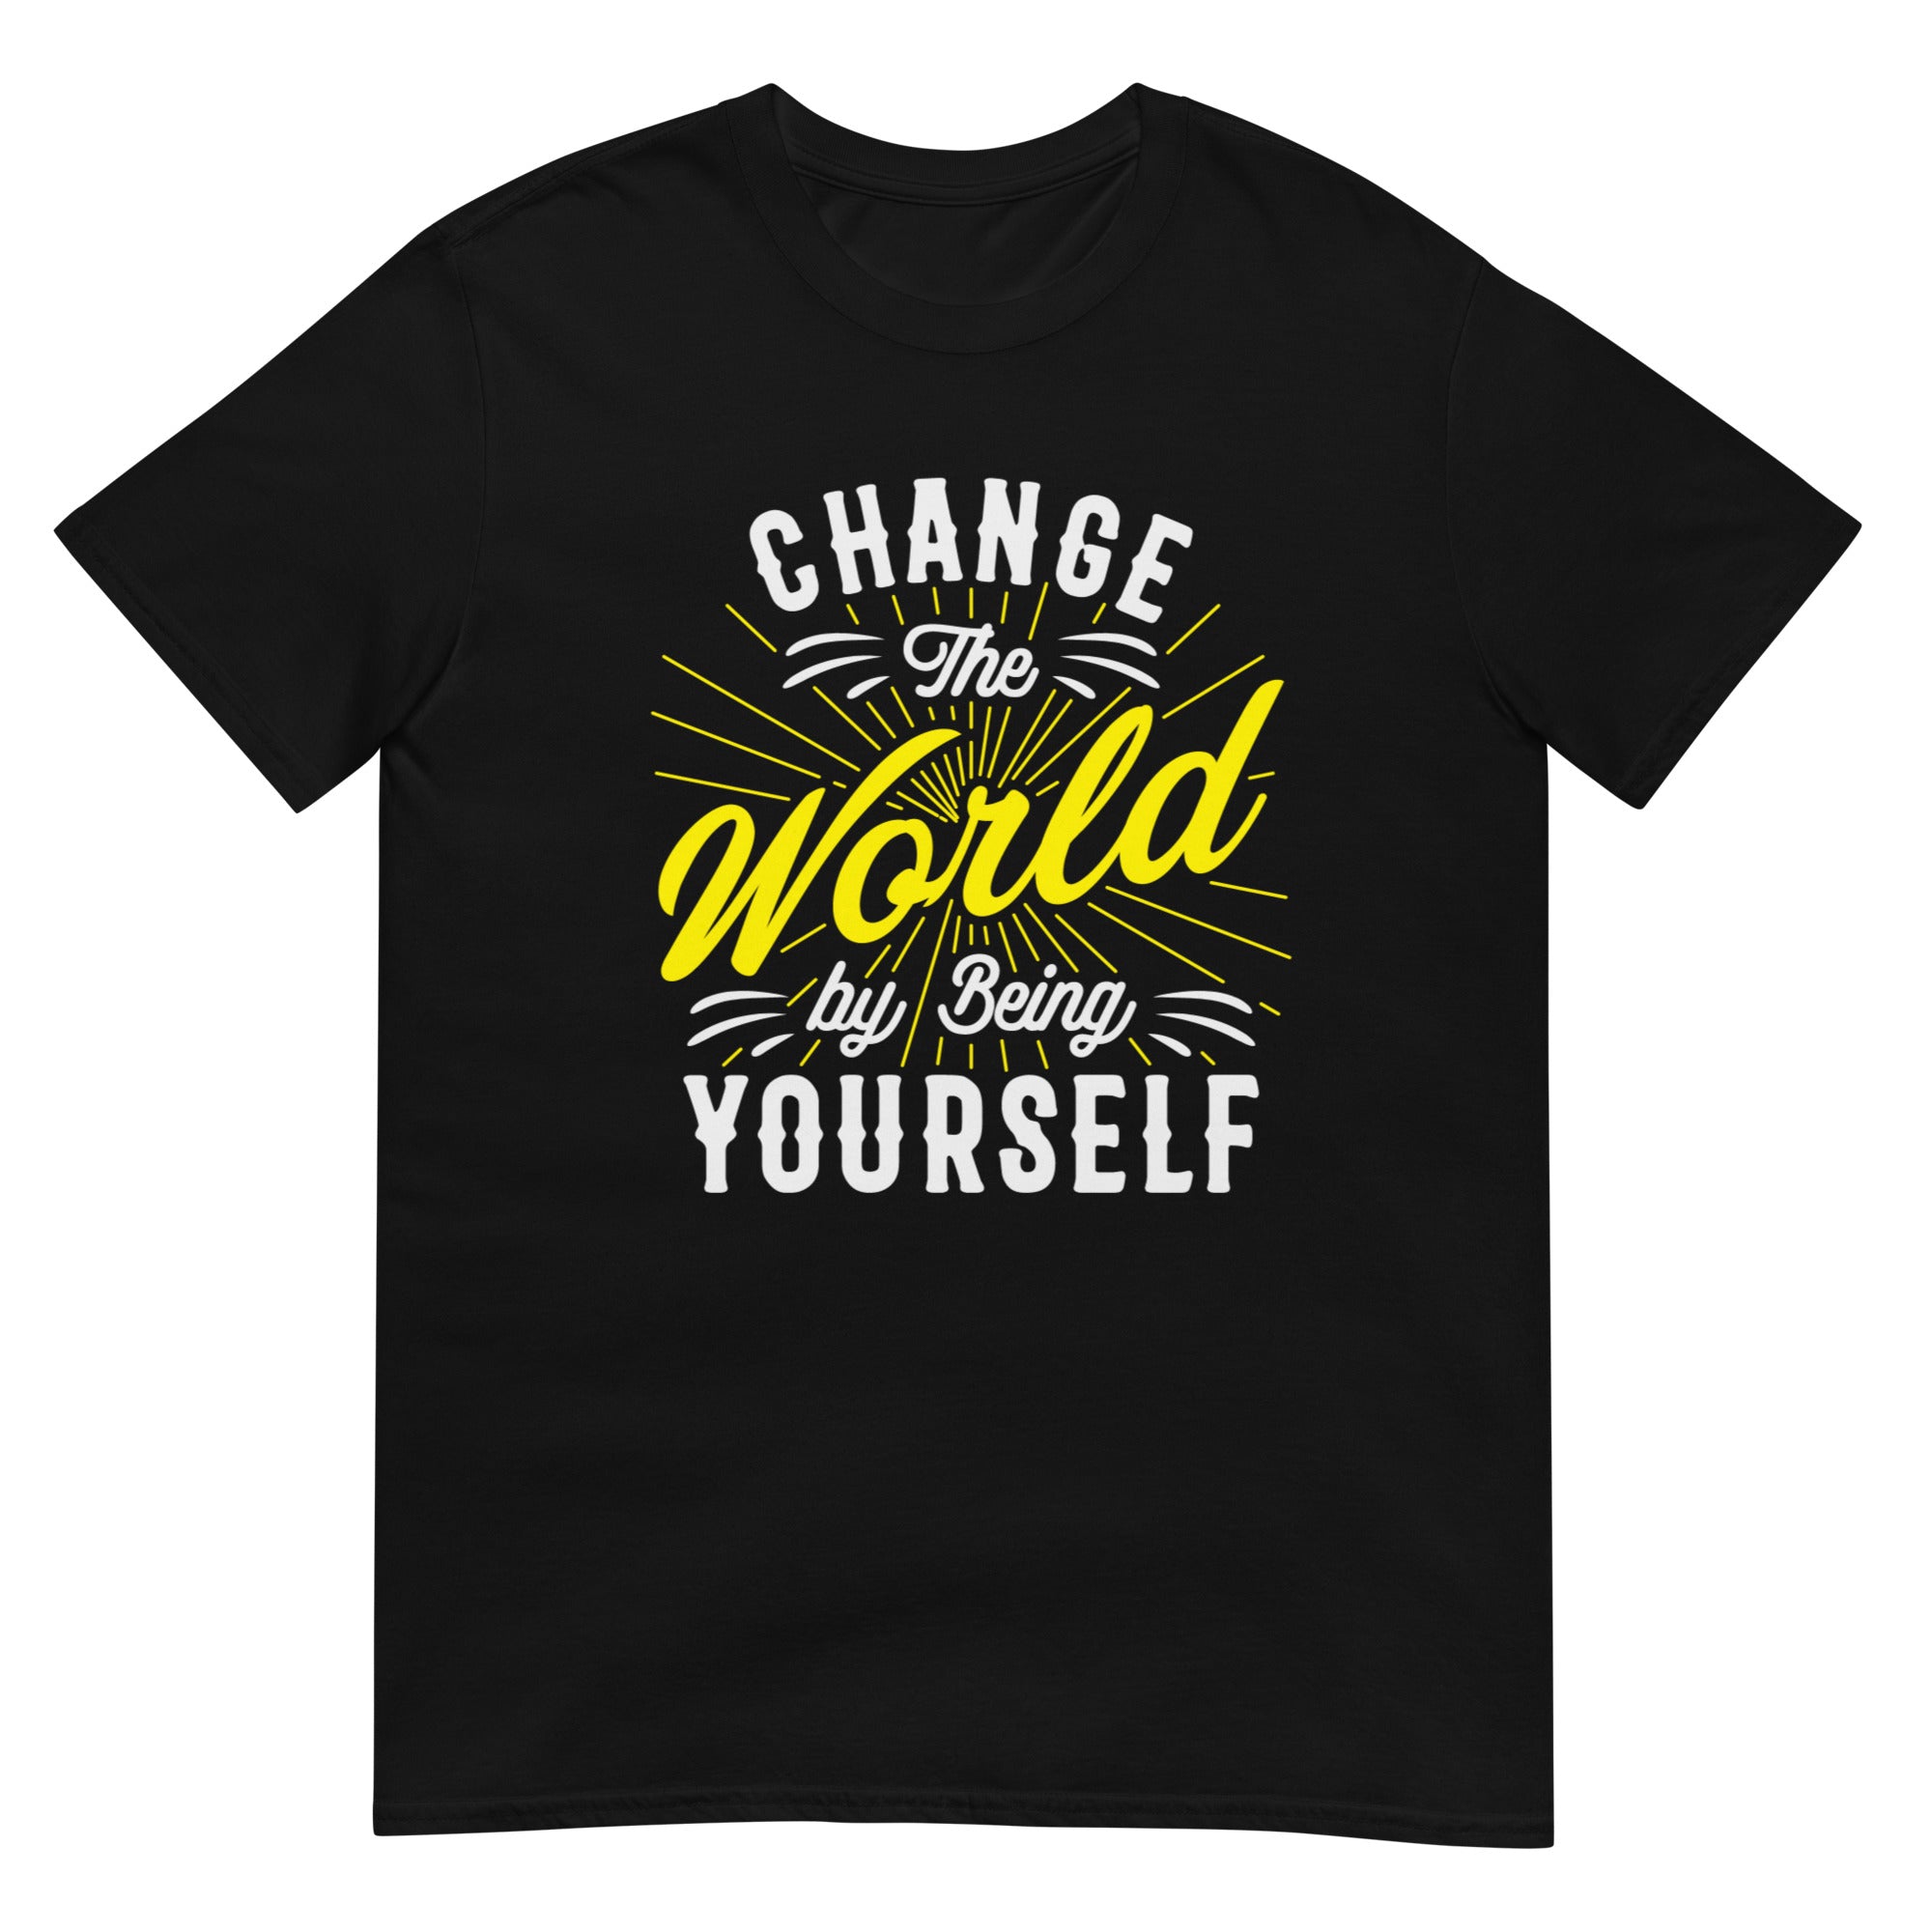 Change The World By Being Yourself - Short-Sleeve Unisex T-Shirt